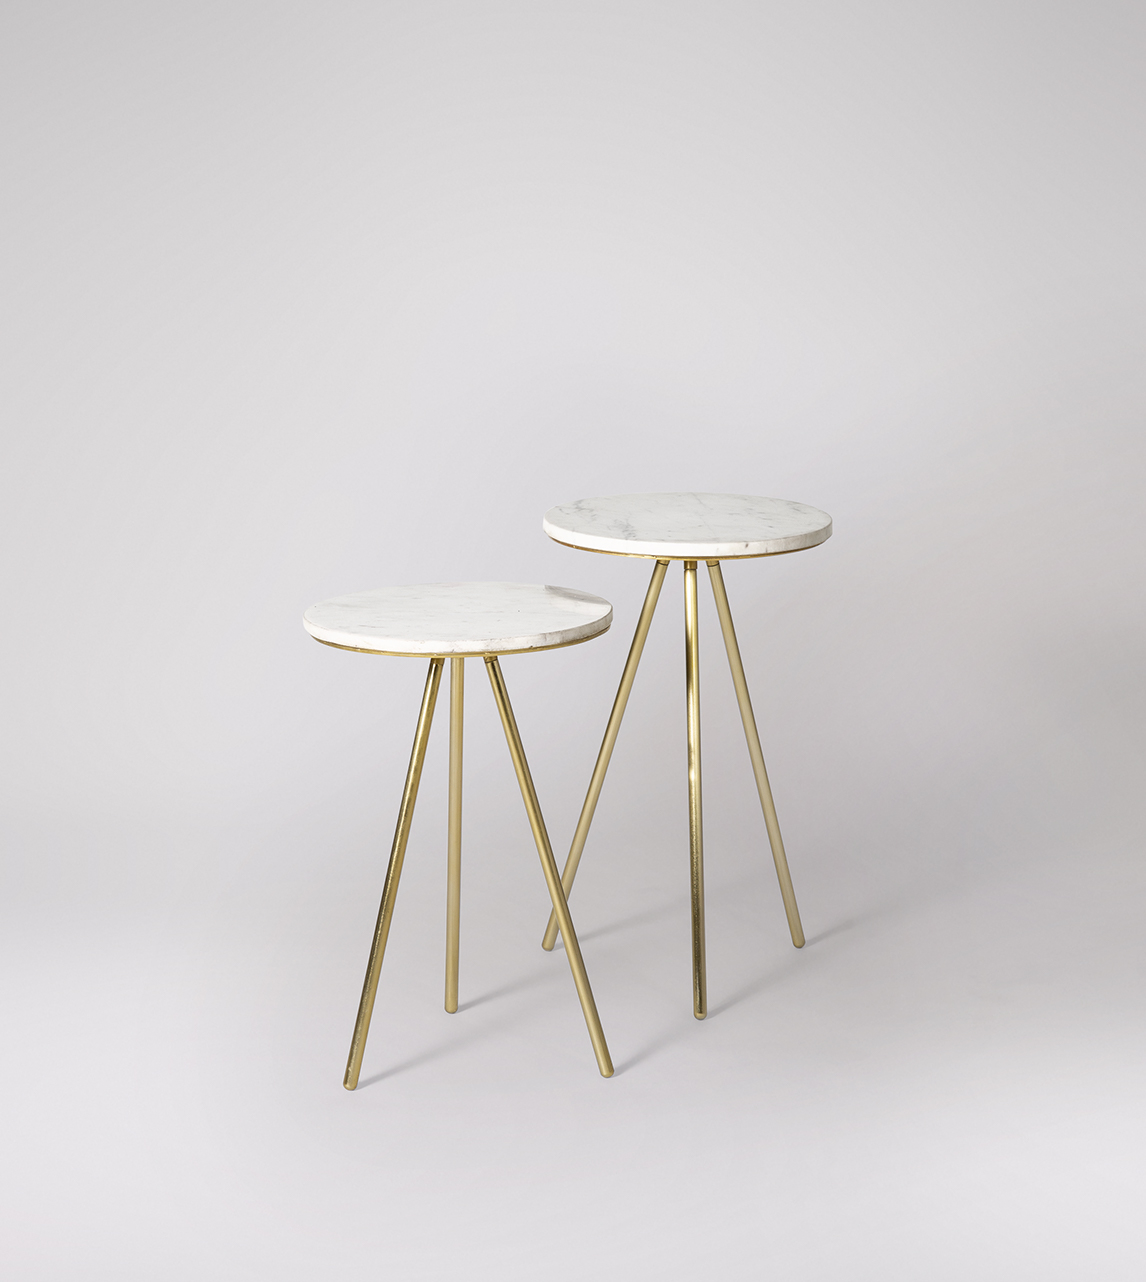 Pearl Set Of 2 Side Tables, Art Deco Style In White Marble And Brass | Swoon